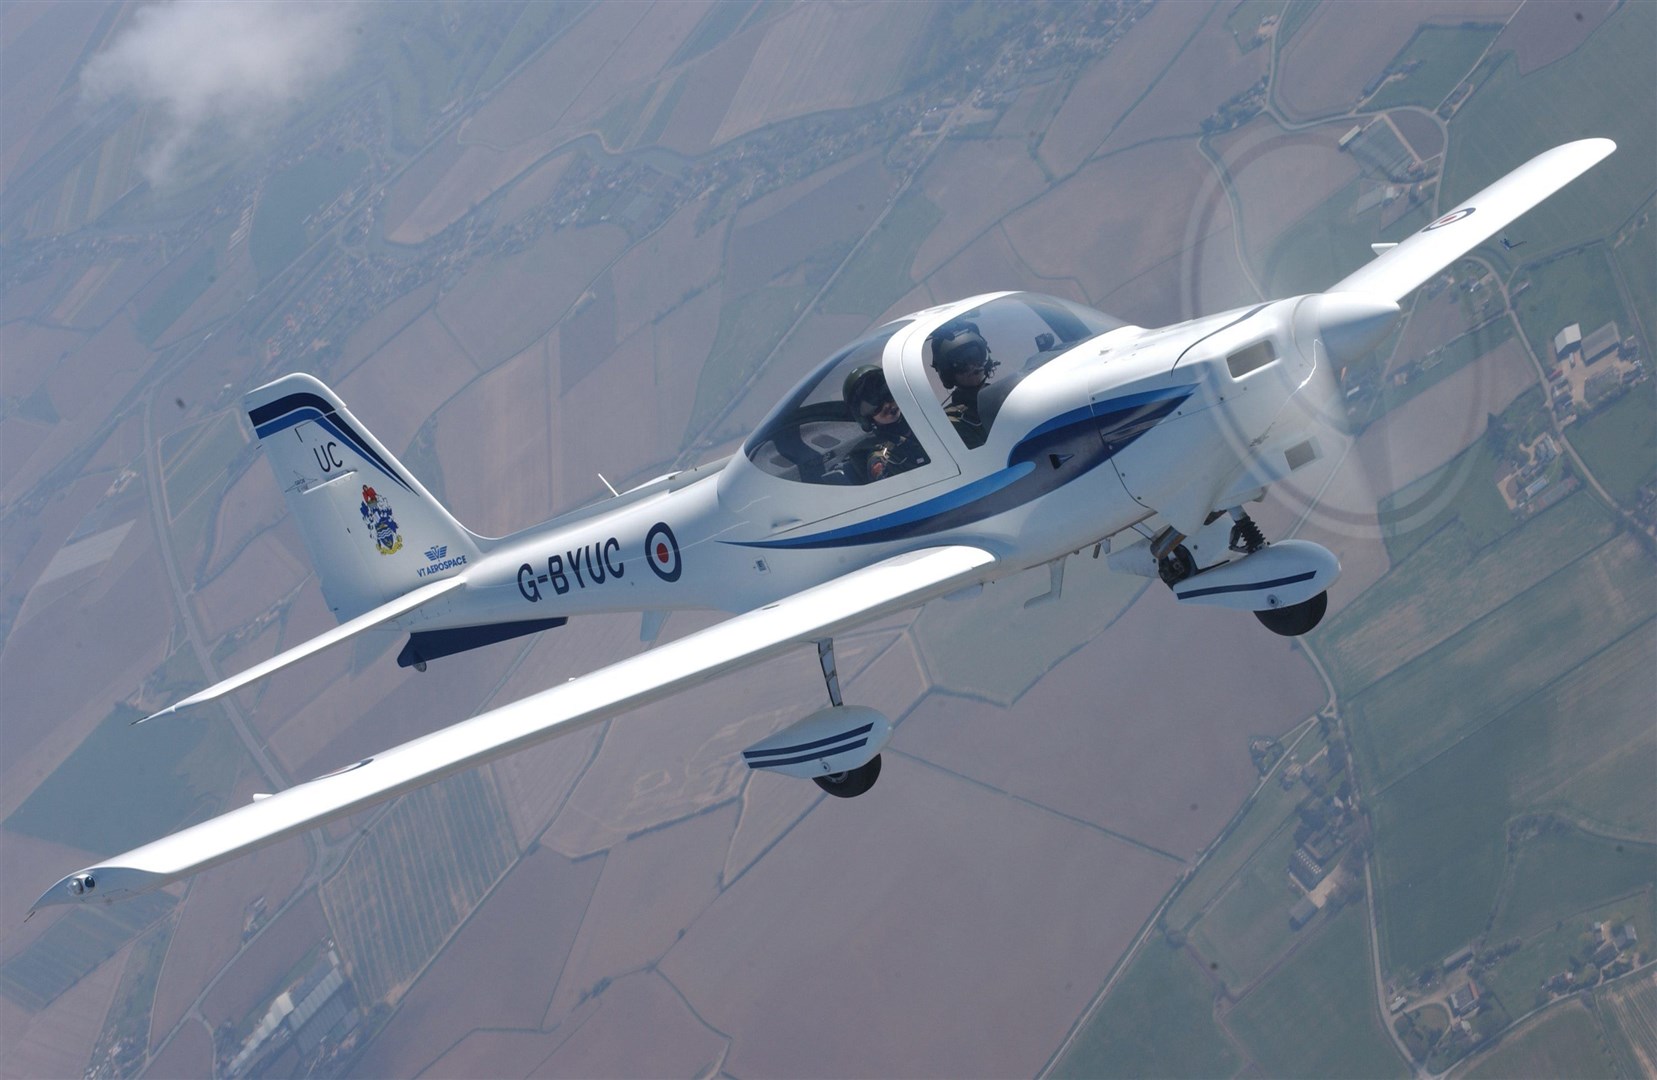 Grob Tutor - the type of aircraft the UGSAS will bring to RAF Lossiemouth for their exercise.